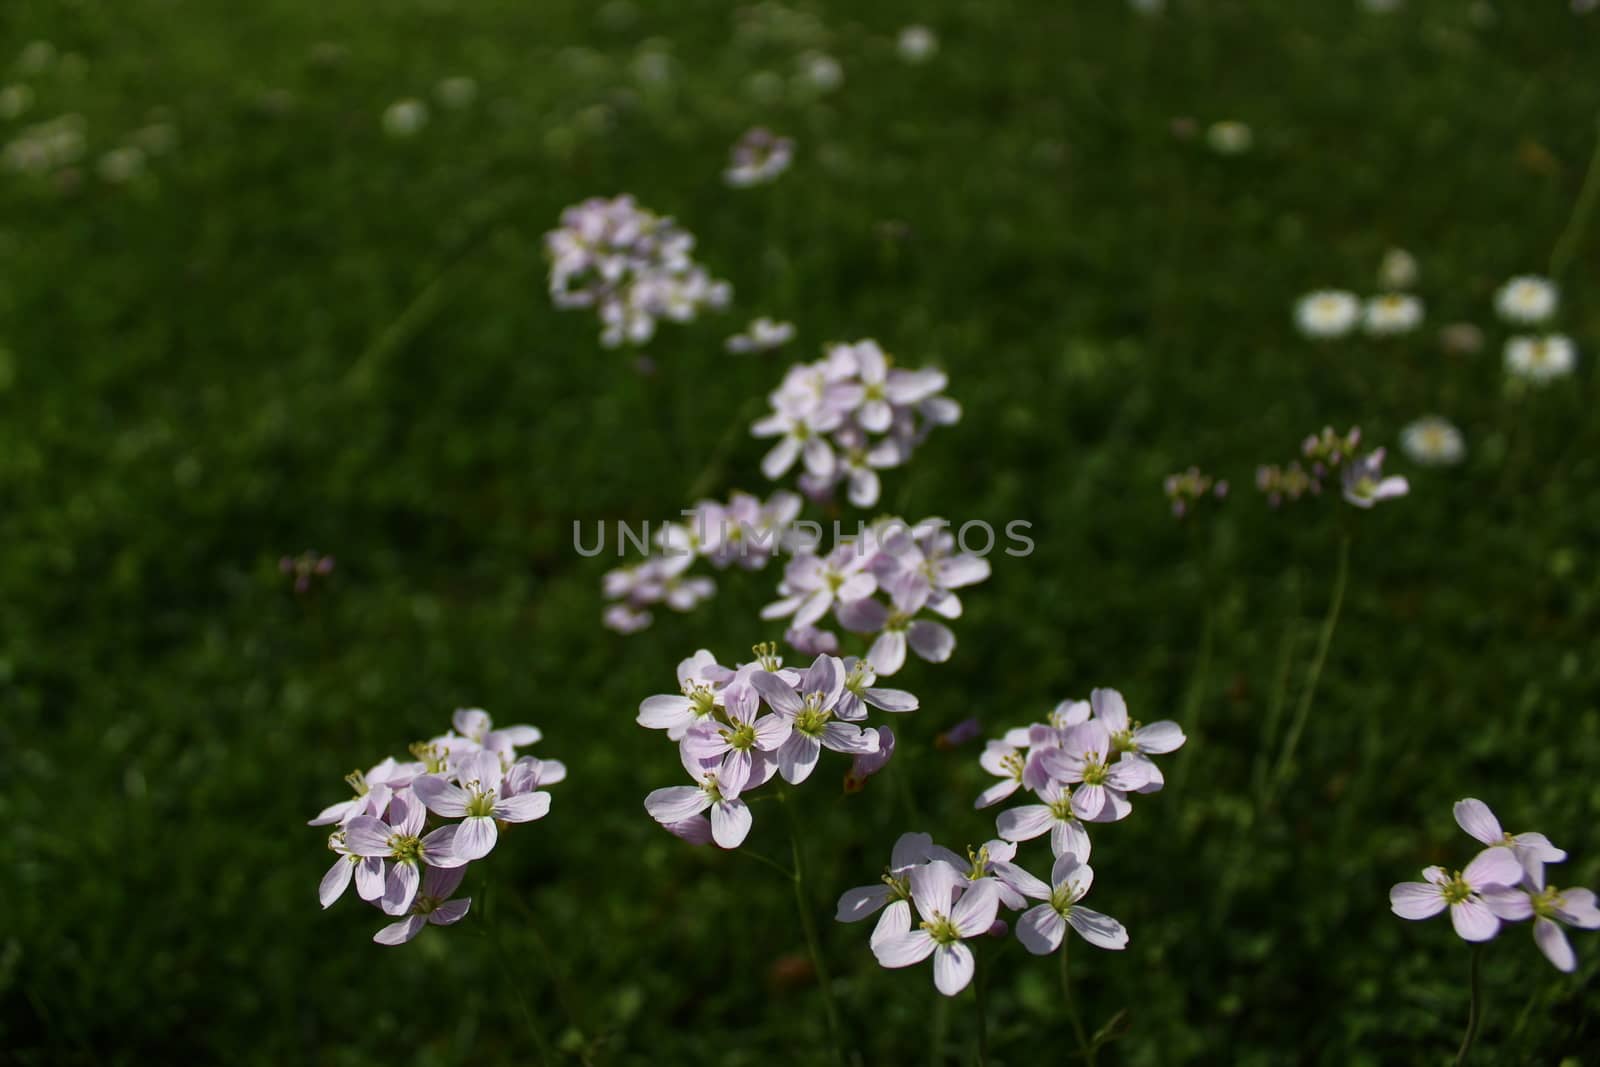 The picture shows a meadow with cuckoo flowers.